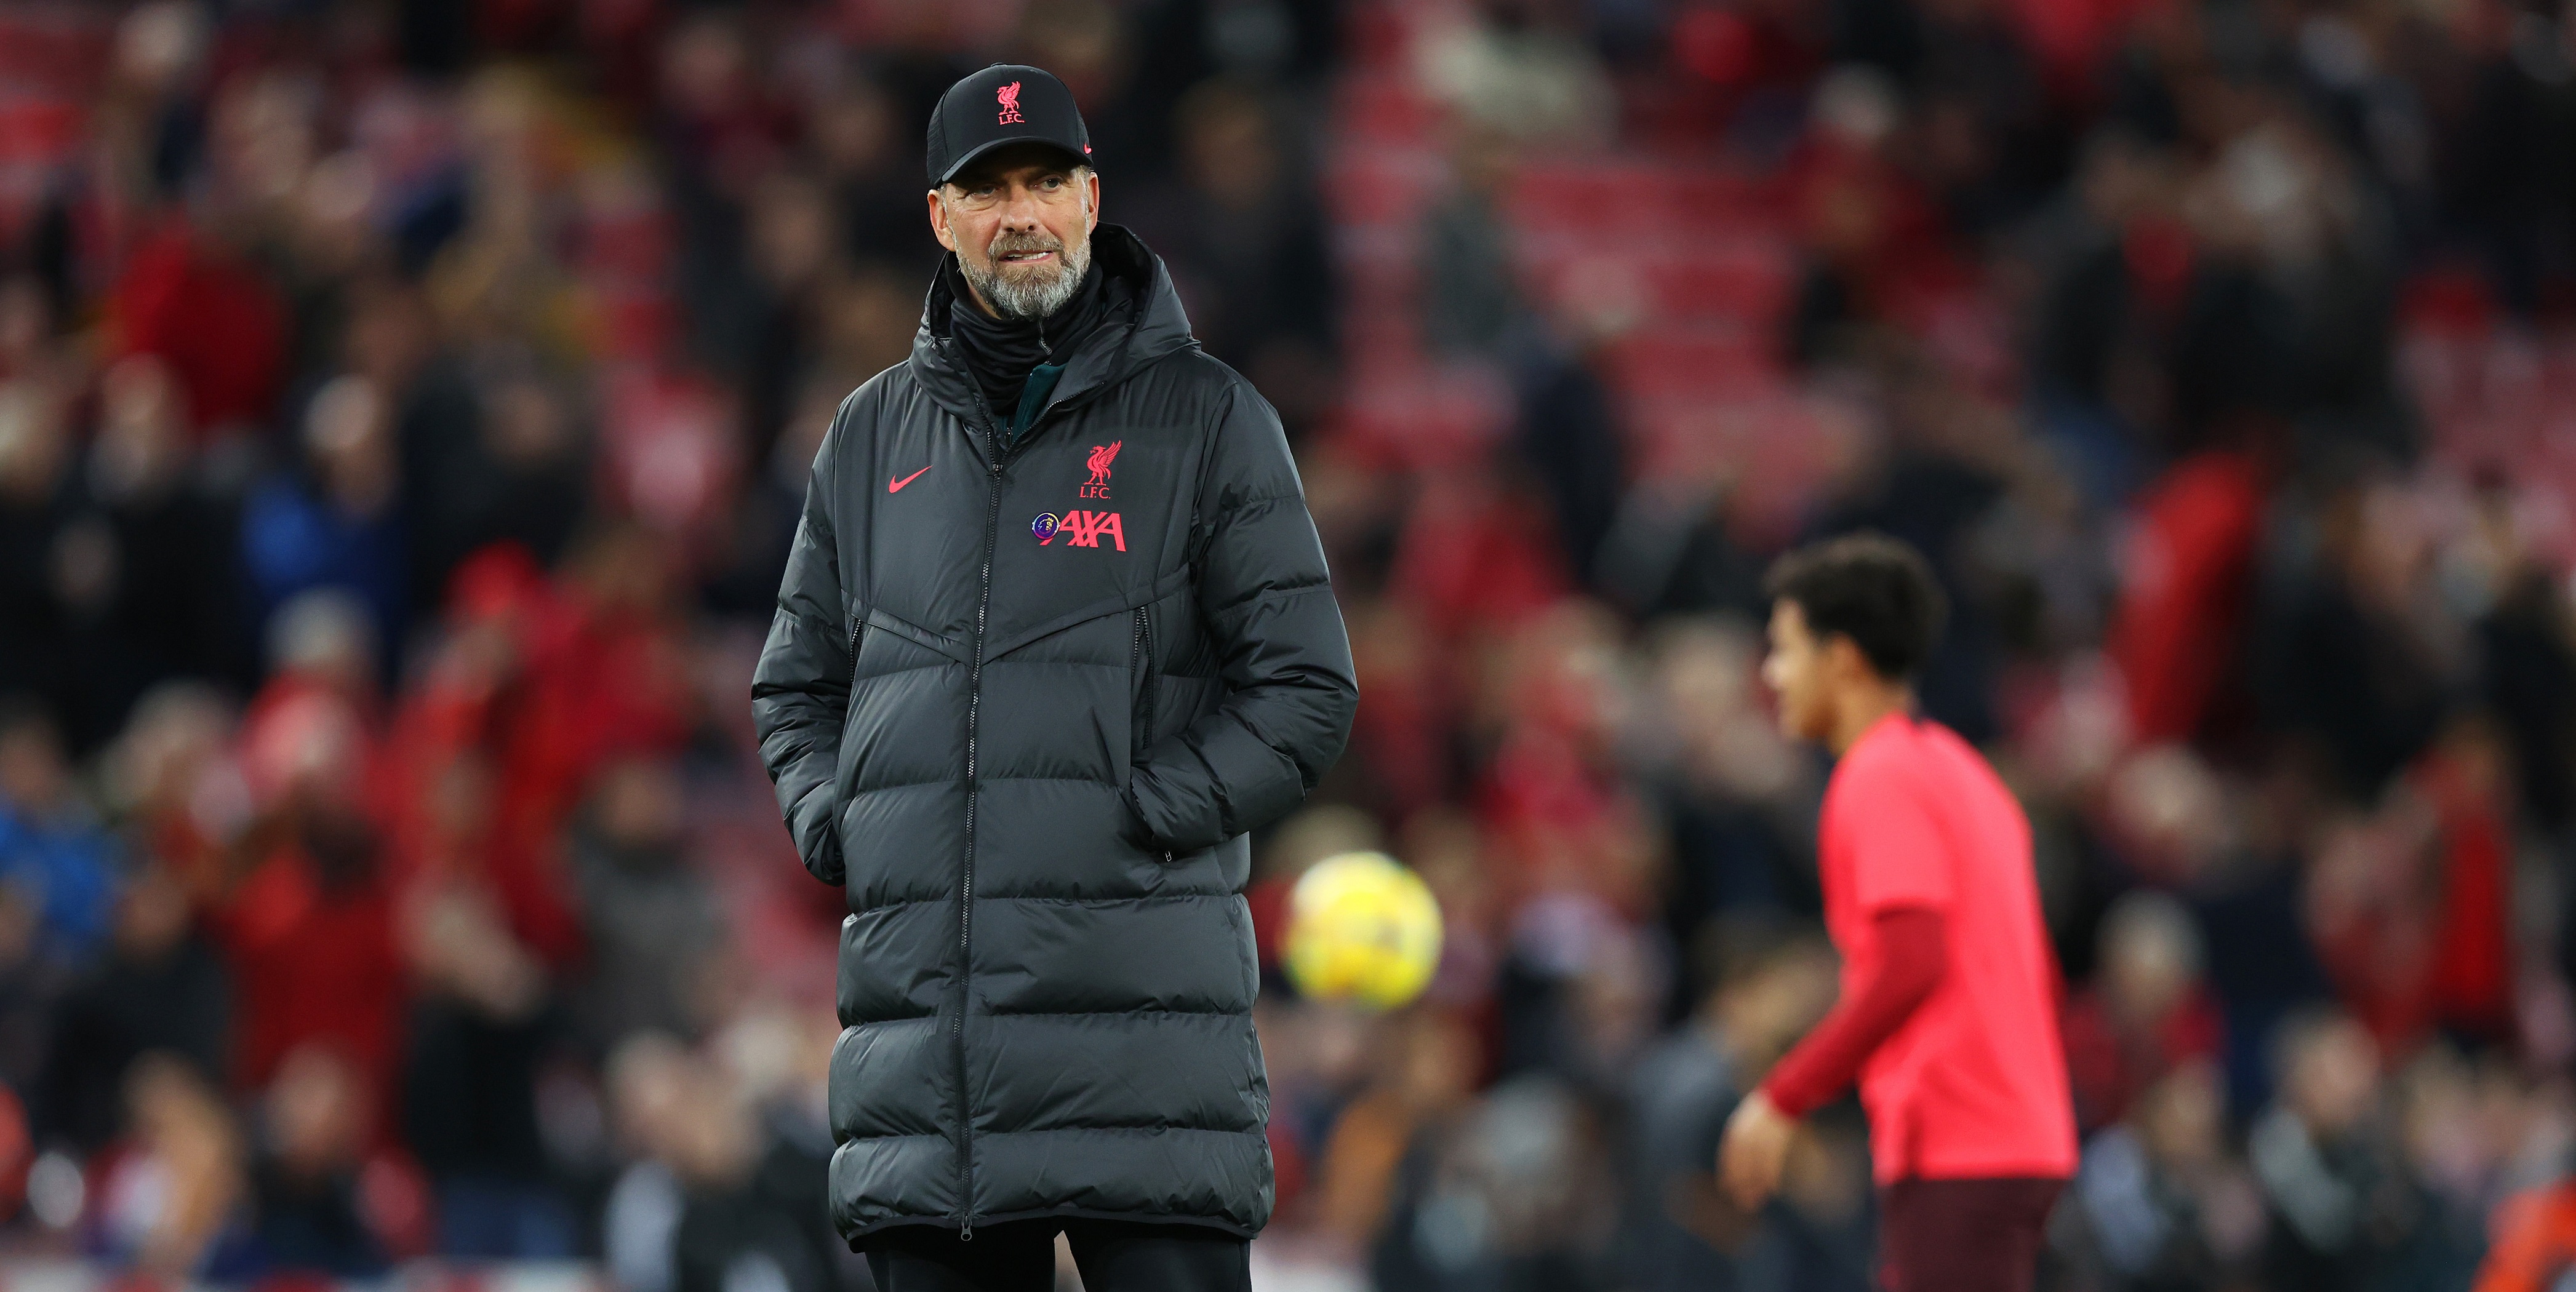 Jurgen Klopp weighs in on Liverpool’s top four hopes after suffering fourth league defeat of the season